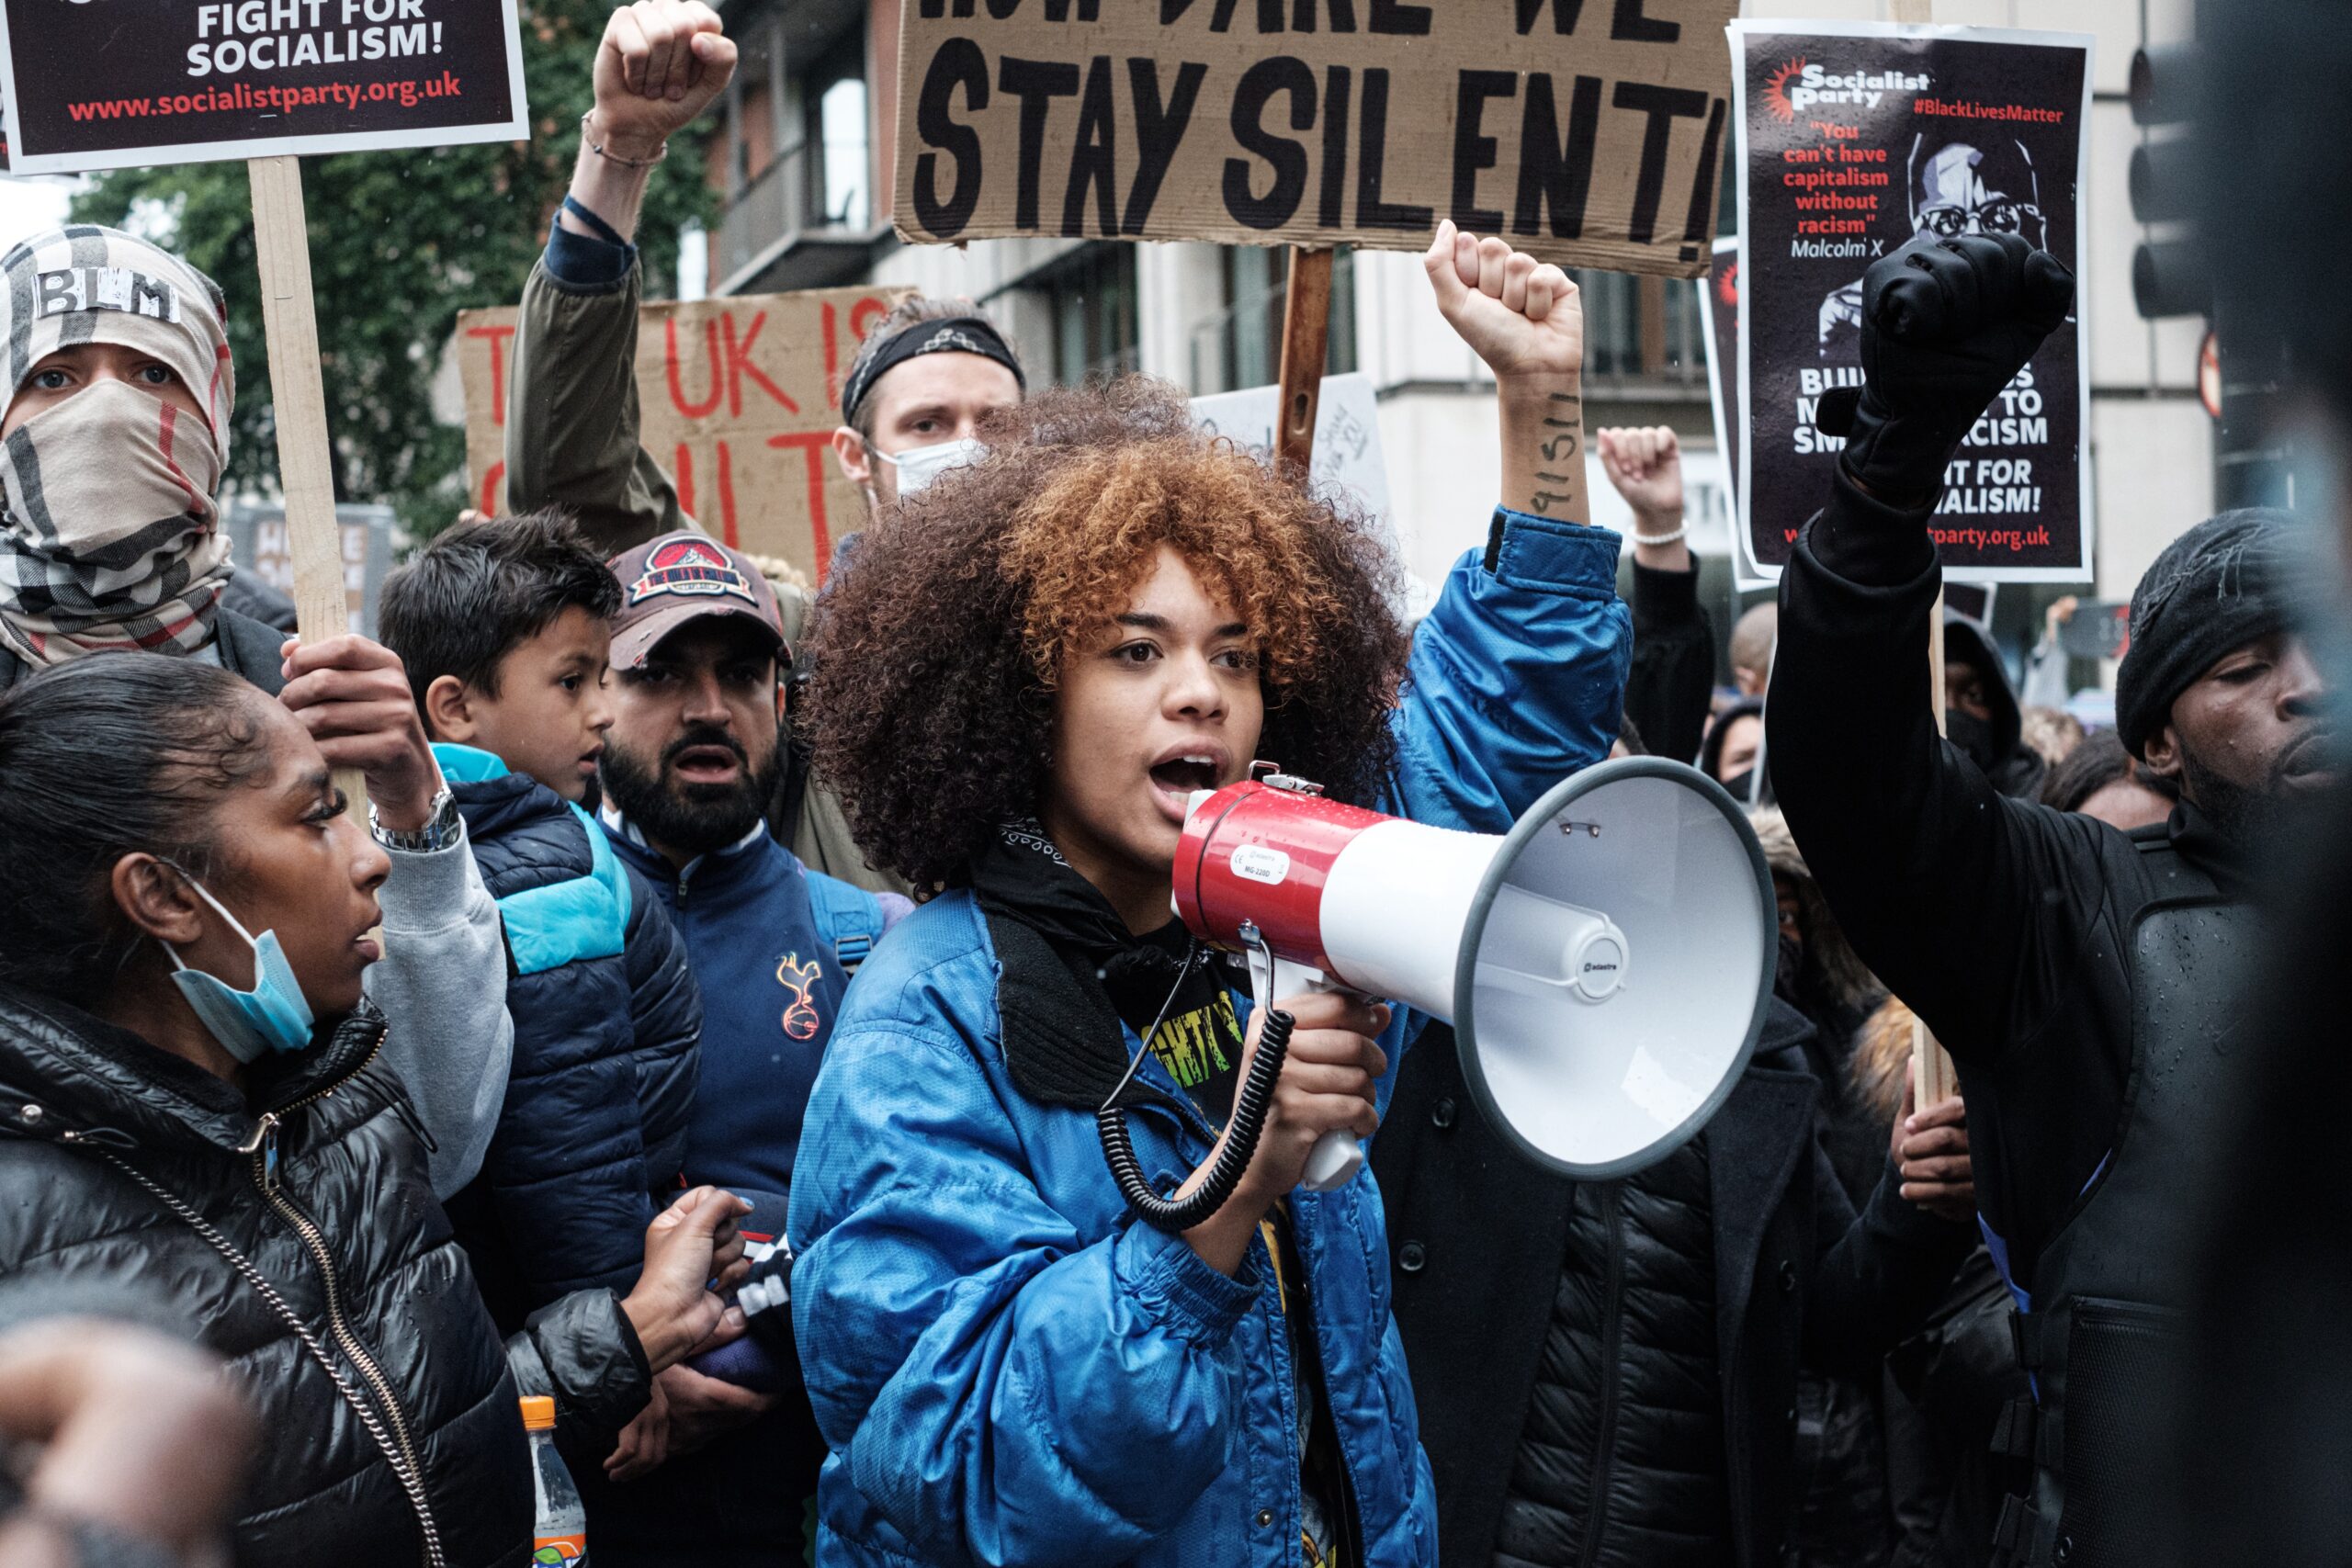 Behind a young woman with a megaphone, a crowd of protesters raise signs and their fists